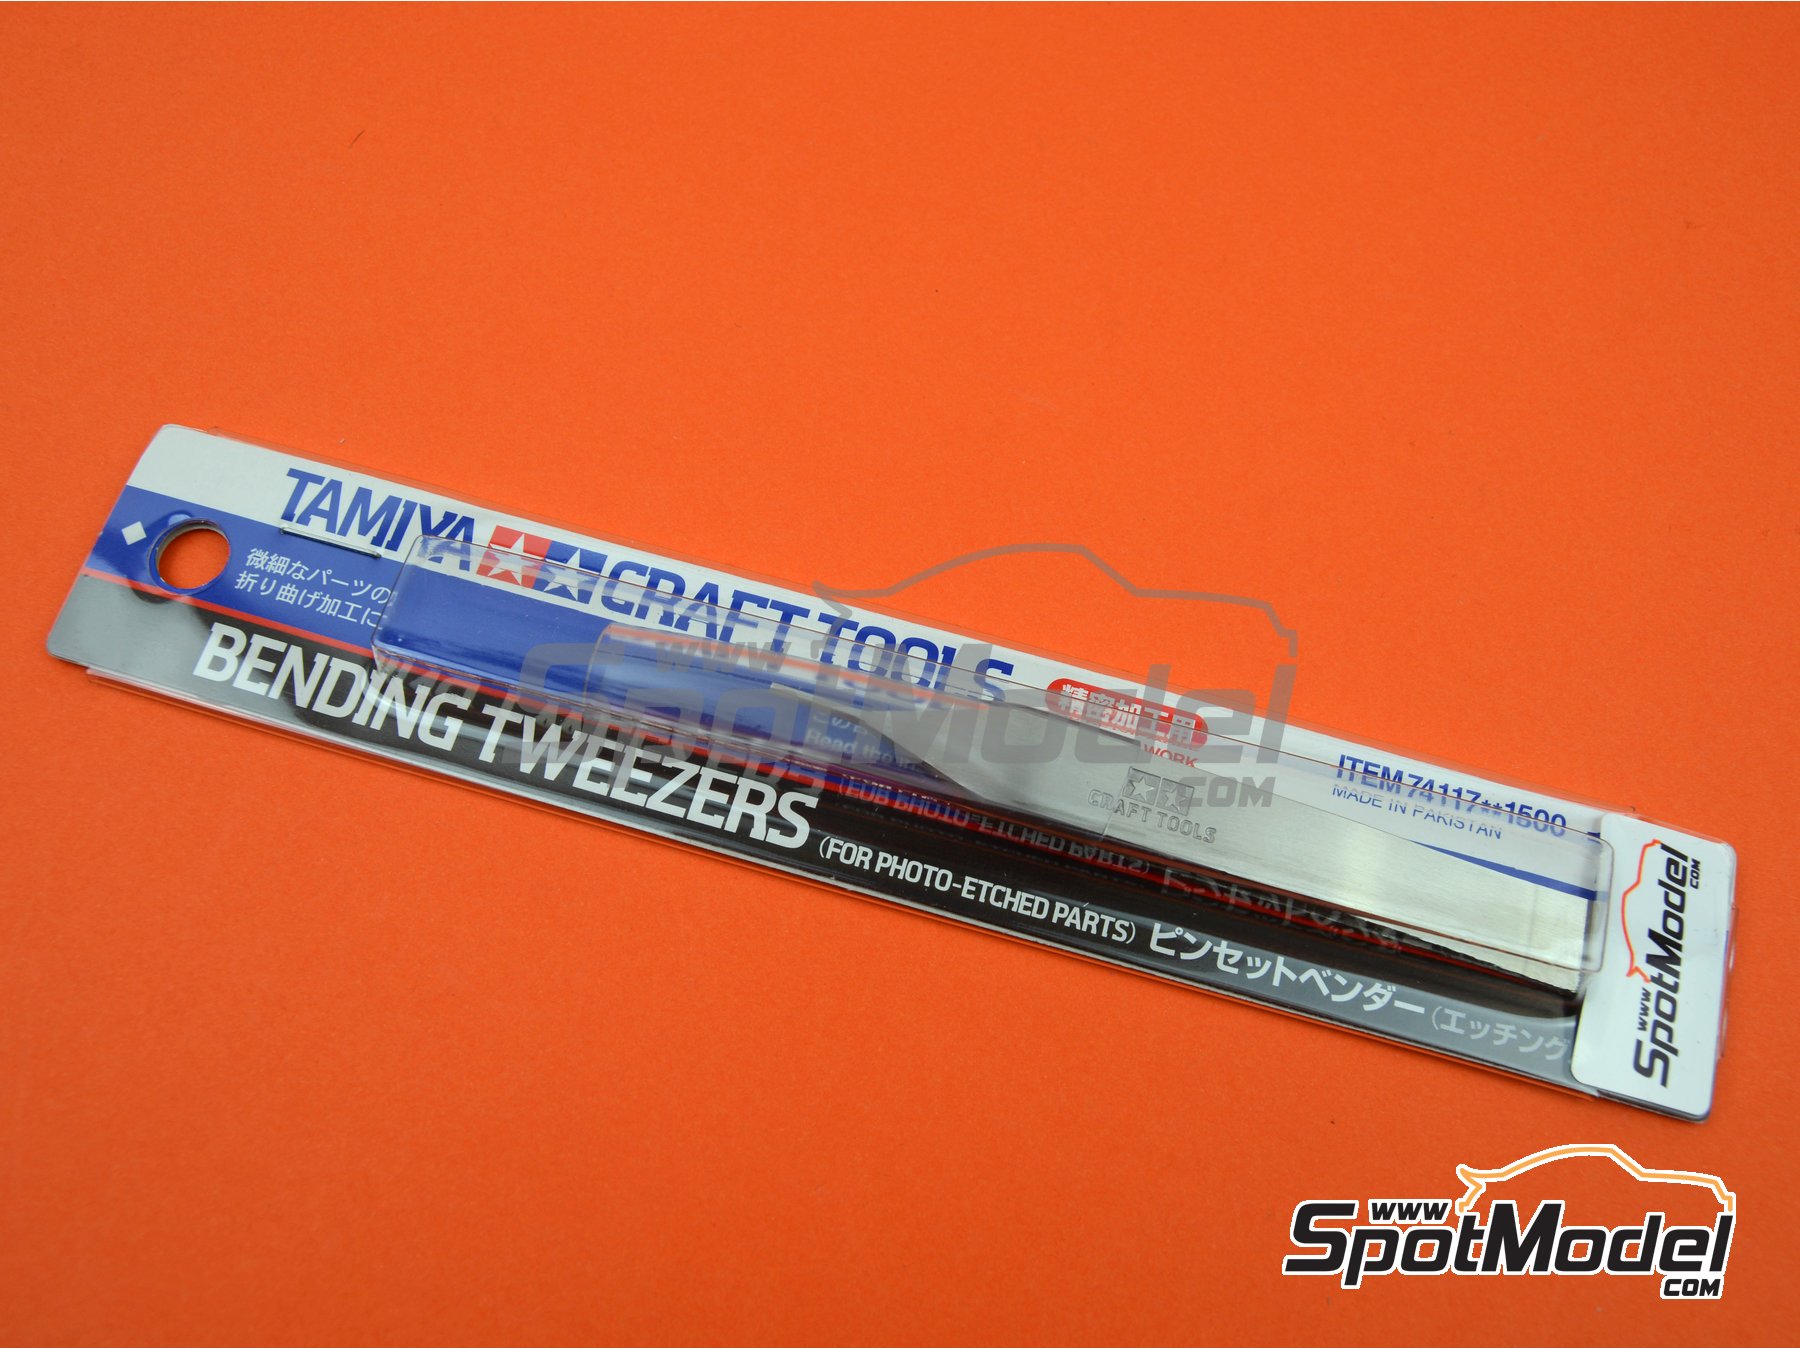 BENDING TWEEZERS TOOL FOR PHOTO-ETCH PARTS 1:24 1:25 TAMIYA CAR MODEL ACCESSORY 